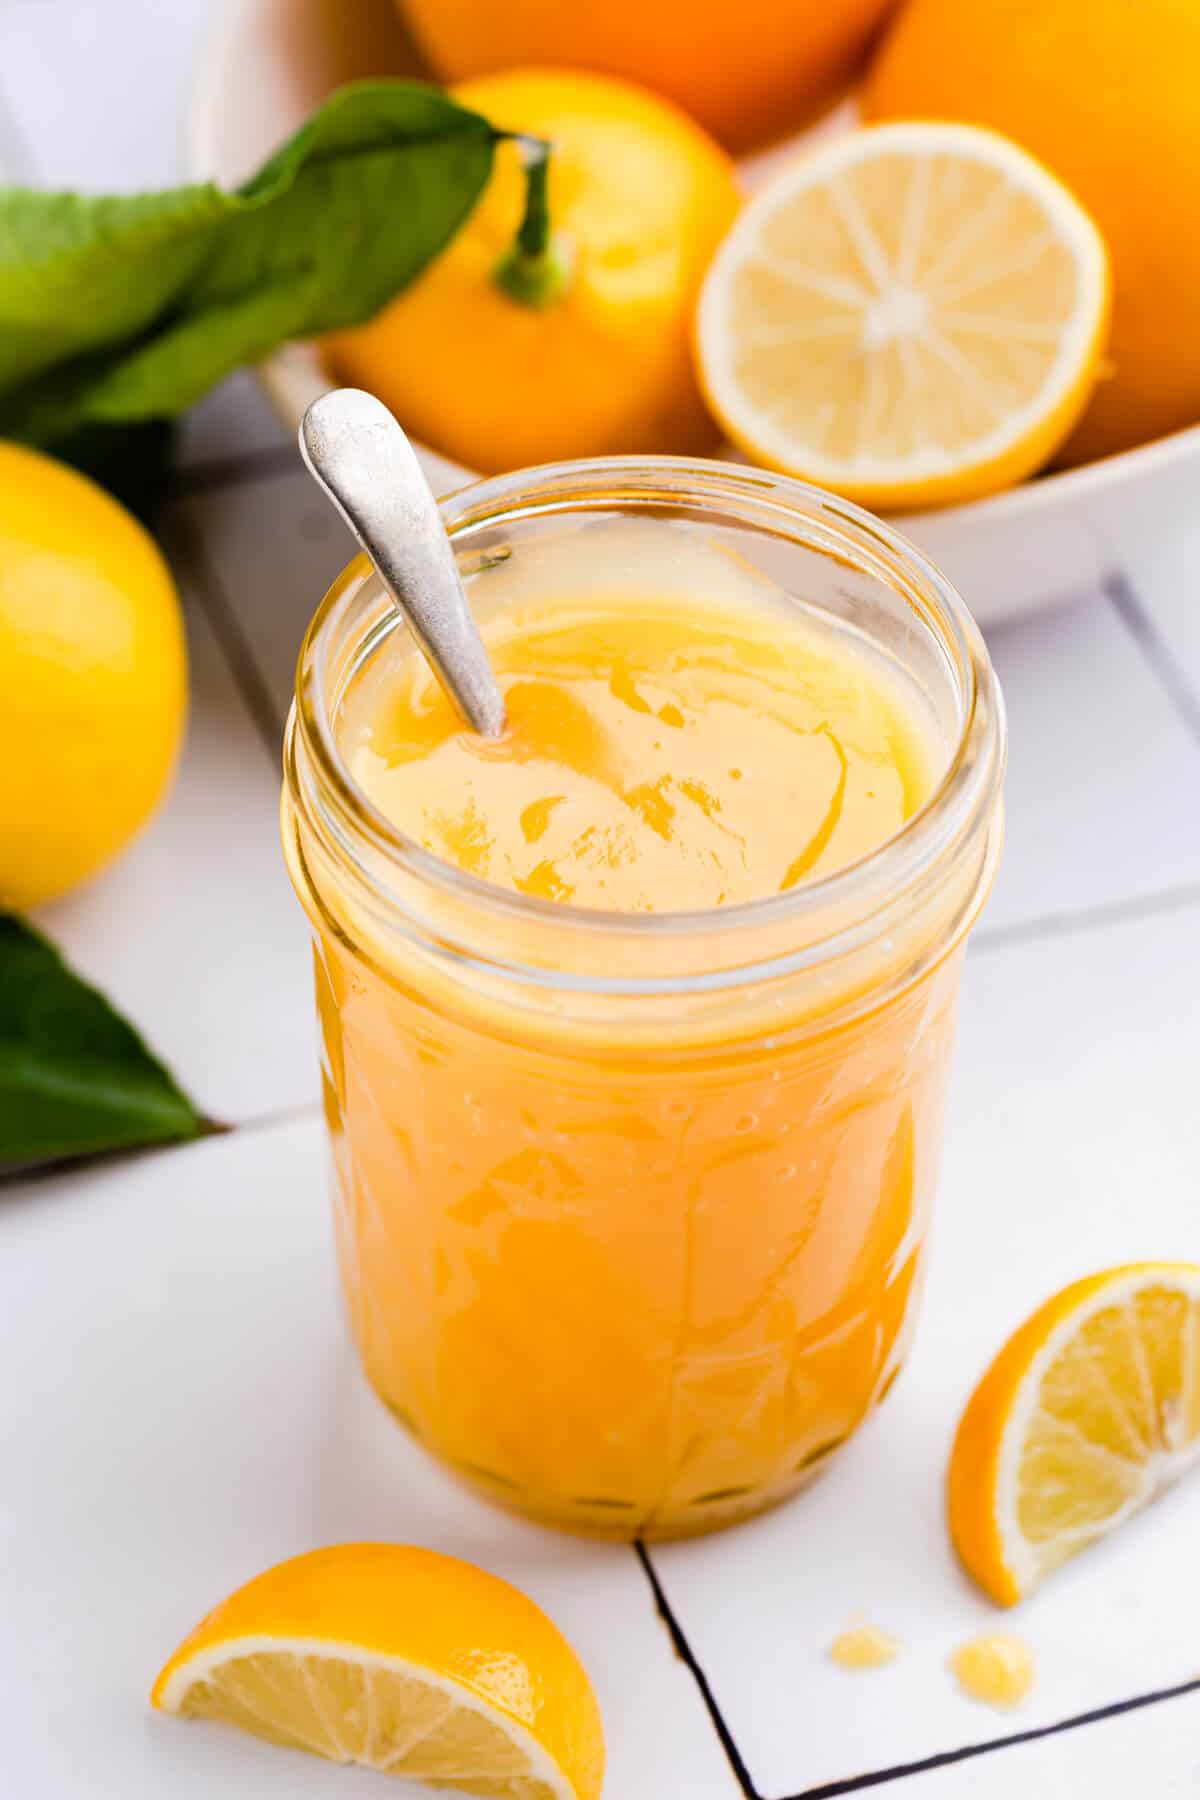 45 degree angle shot of a jar with citrus curd and small spoon inside of the jar